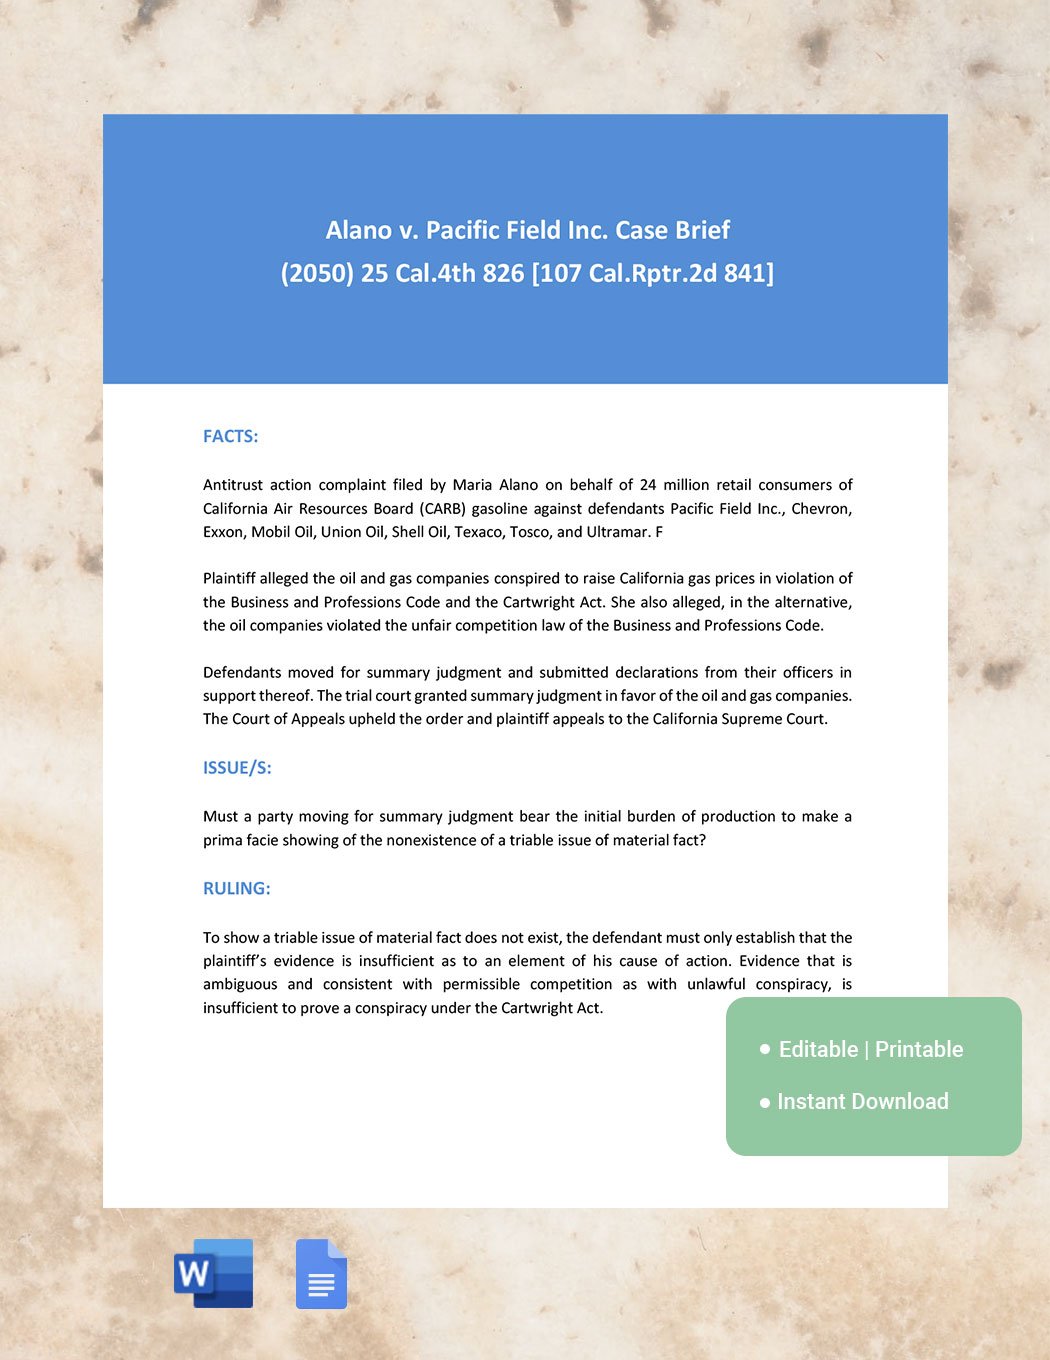 free-law-school-notes-case-brief-template-google-docs-word